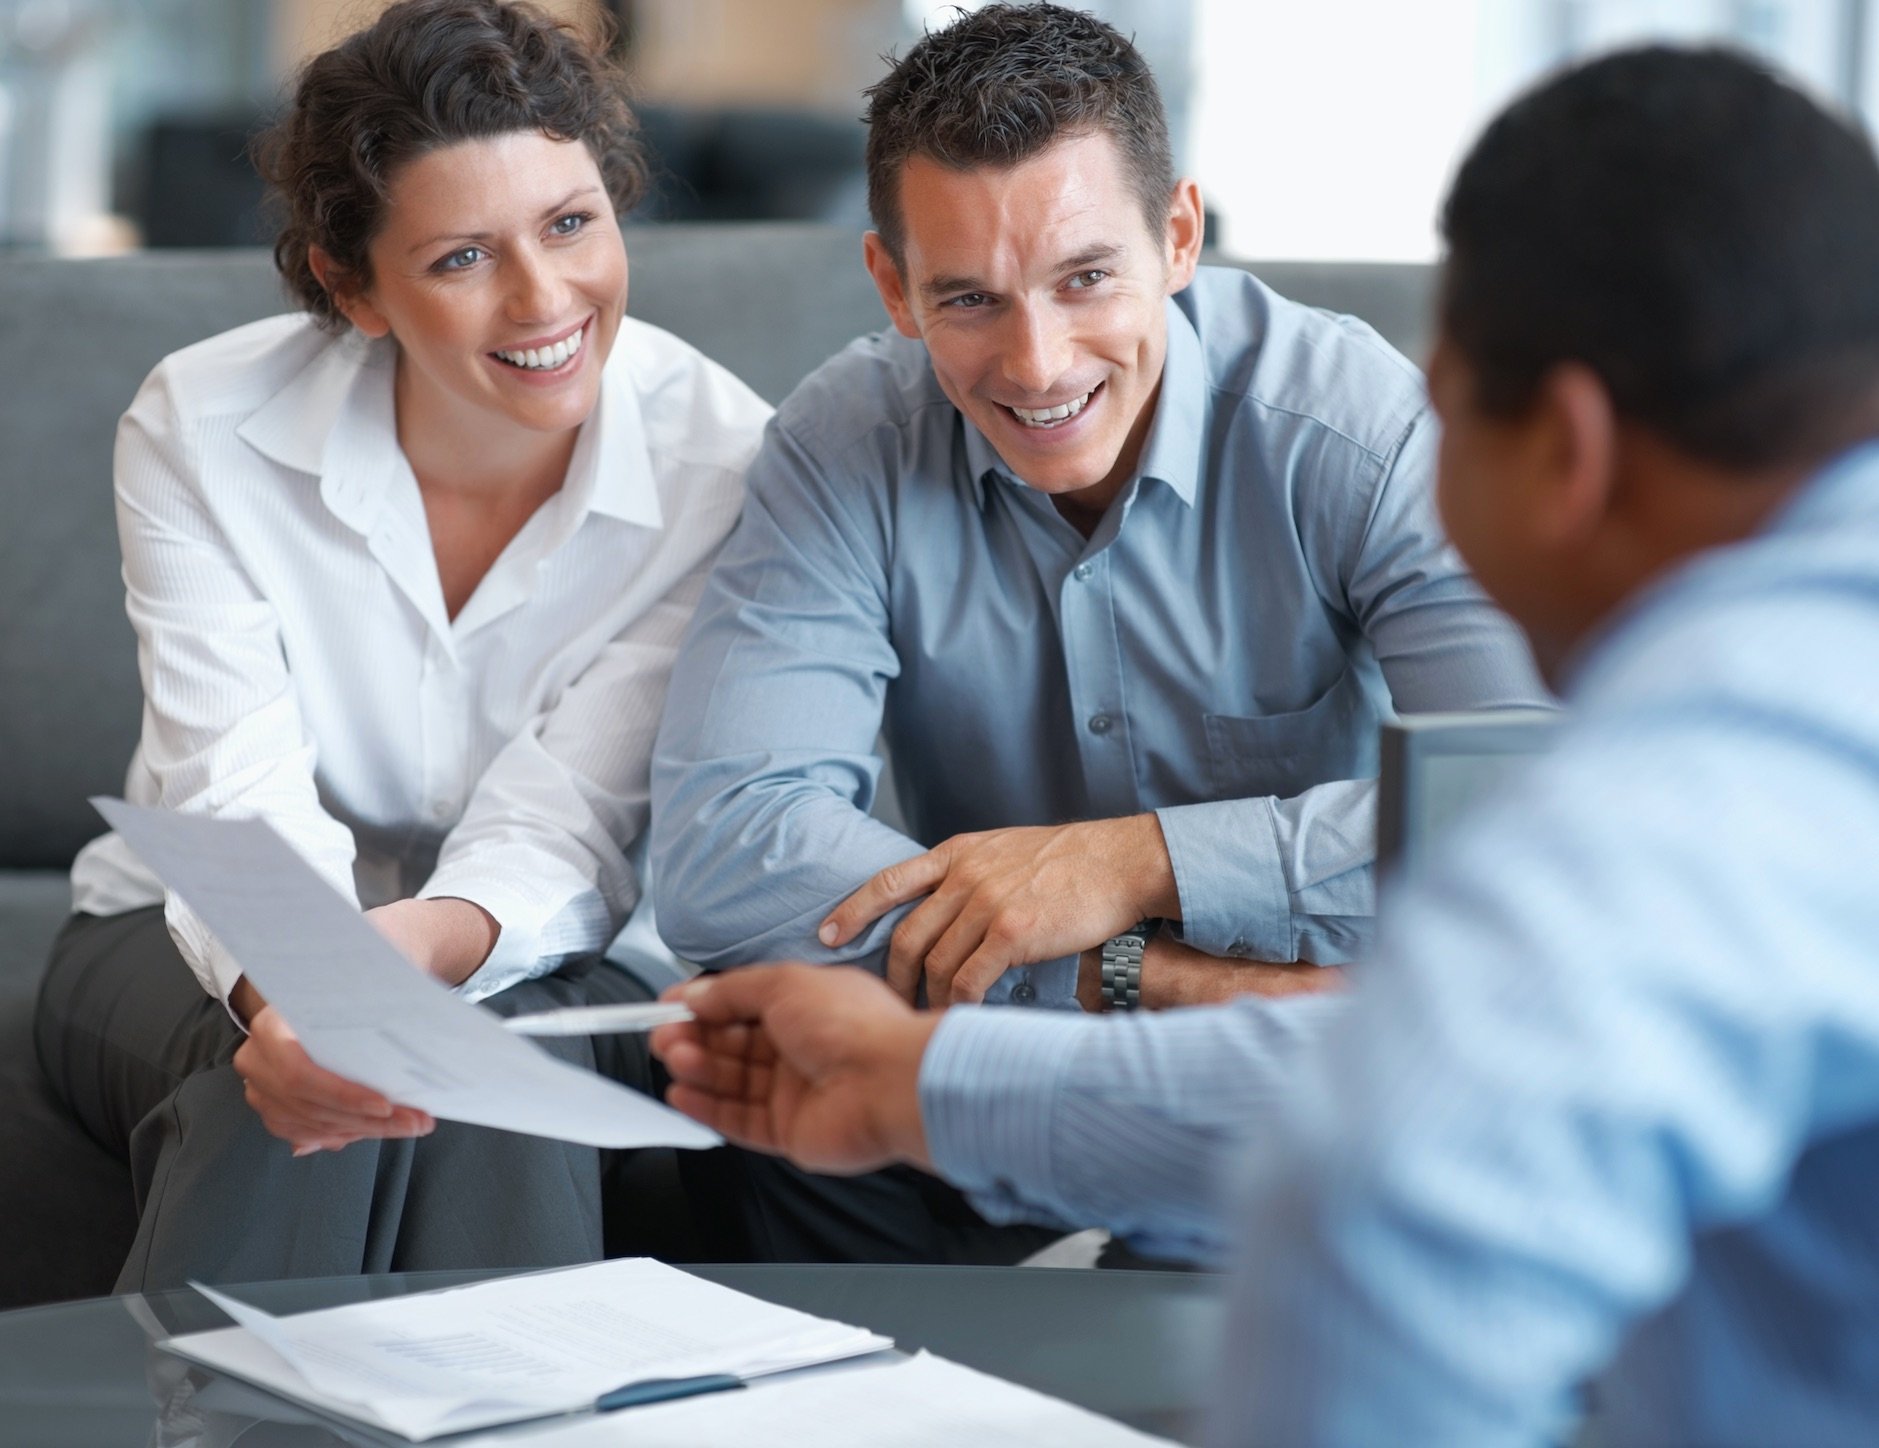 Smiling couple looking at paperwork with a trusted advisor